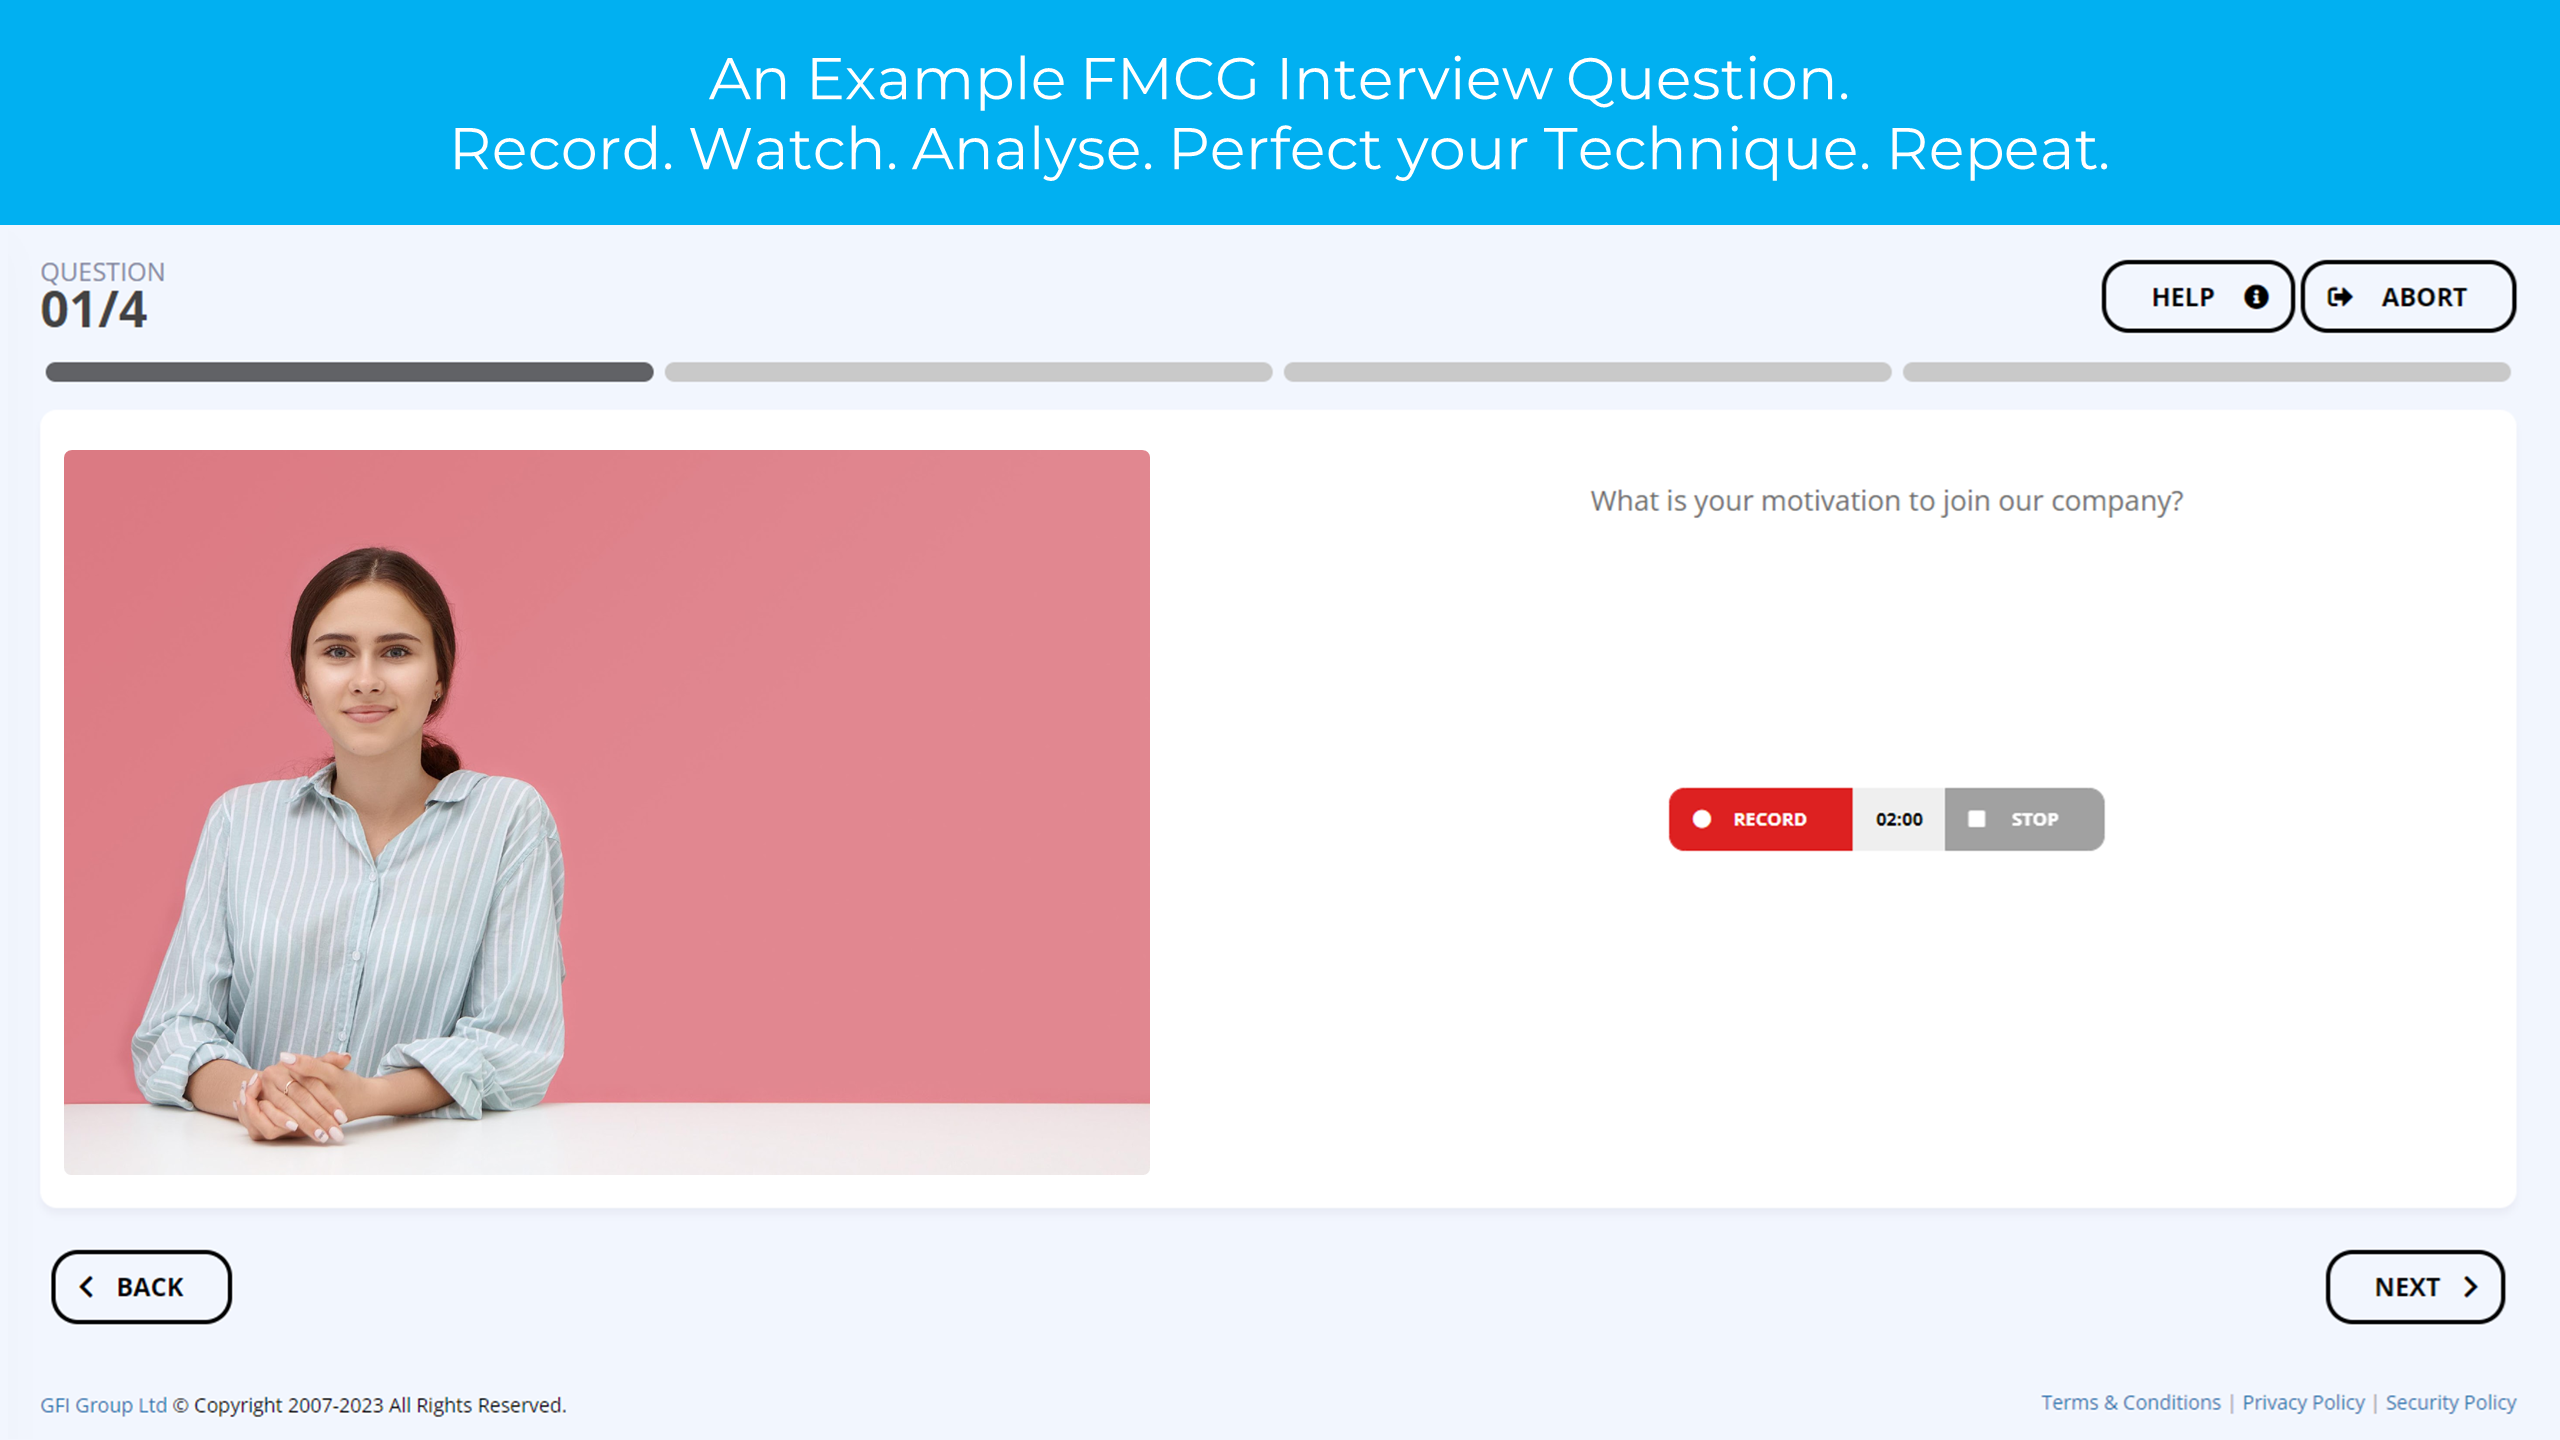 Practice FMCG Video Interview Questions